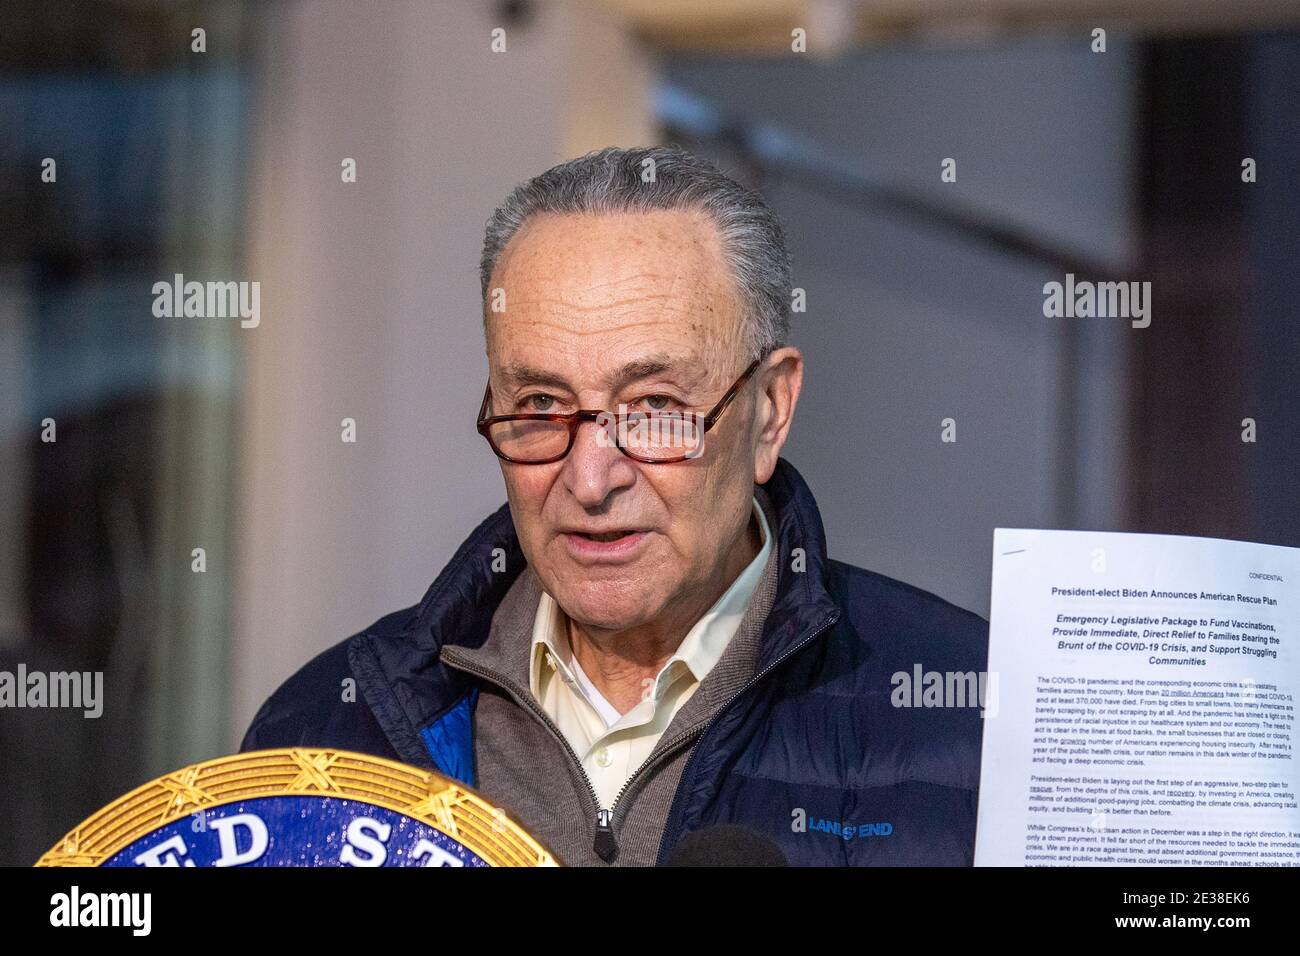 U.S. Senator Chuck Schumer (D-NY) speaks during media briefing on Biden's Rescue Plan on January 17, 2021 in New York City. Senator Schumer will become U.S. Senate majority leader this upcoming week and will push President-elect Joe Biden's $1.9 Trillion Plan to Stem the Virus and Steady the Economy. Stock Photo